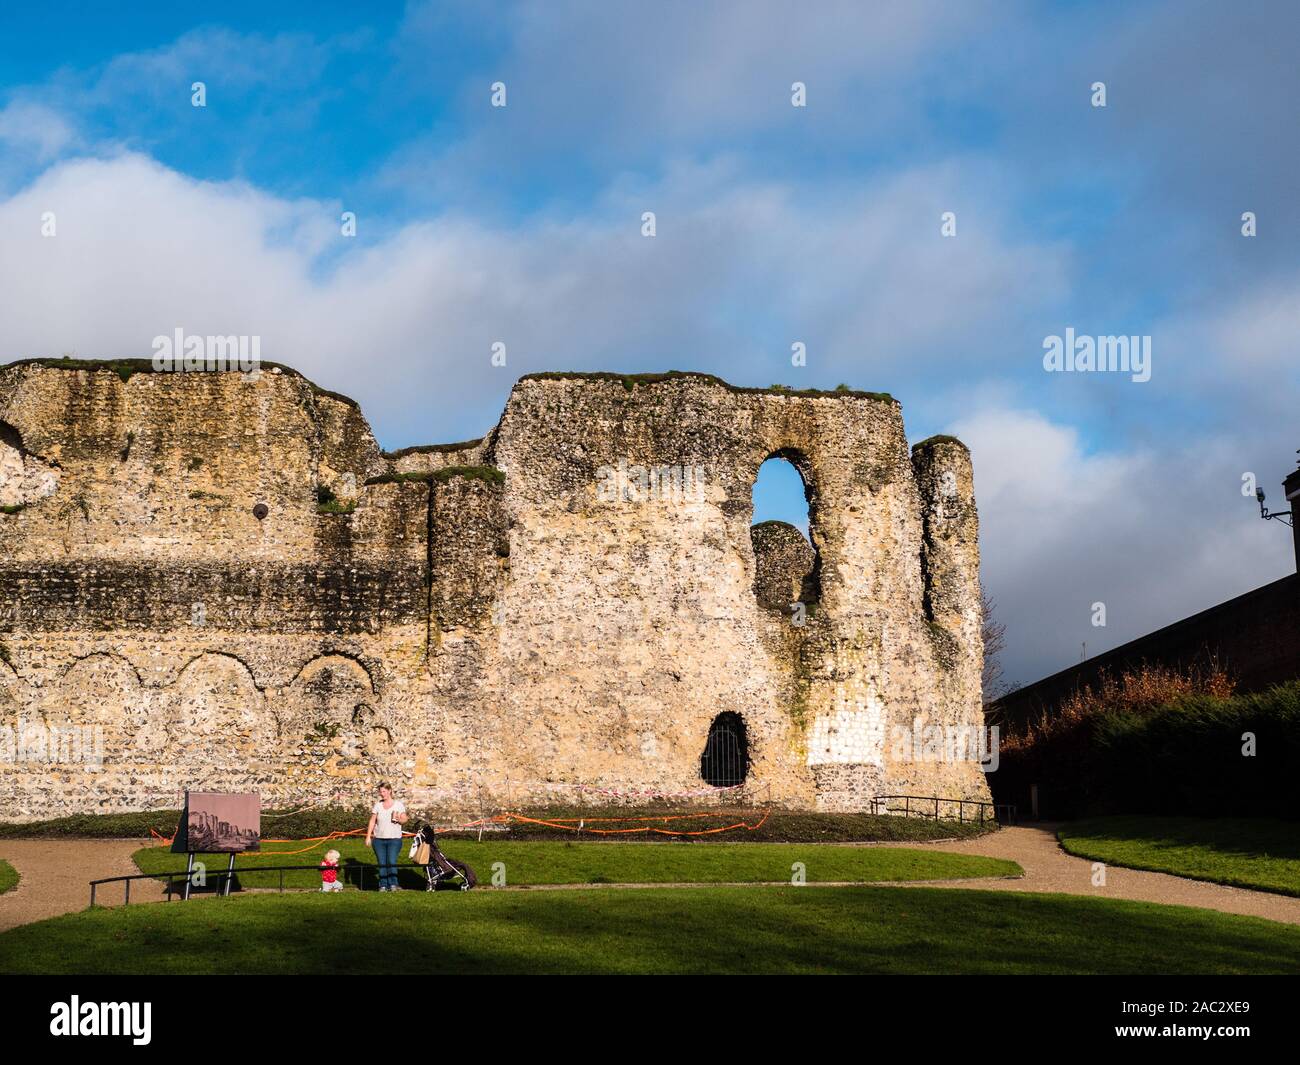 Mother and Child, Reading, Abbey Ruins, Reading, Berkshire, England, UK, GB. Stock Photo